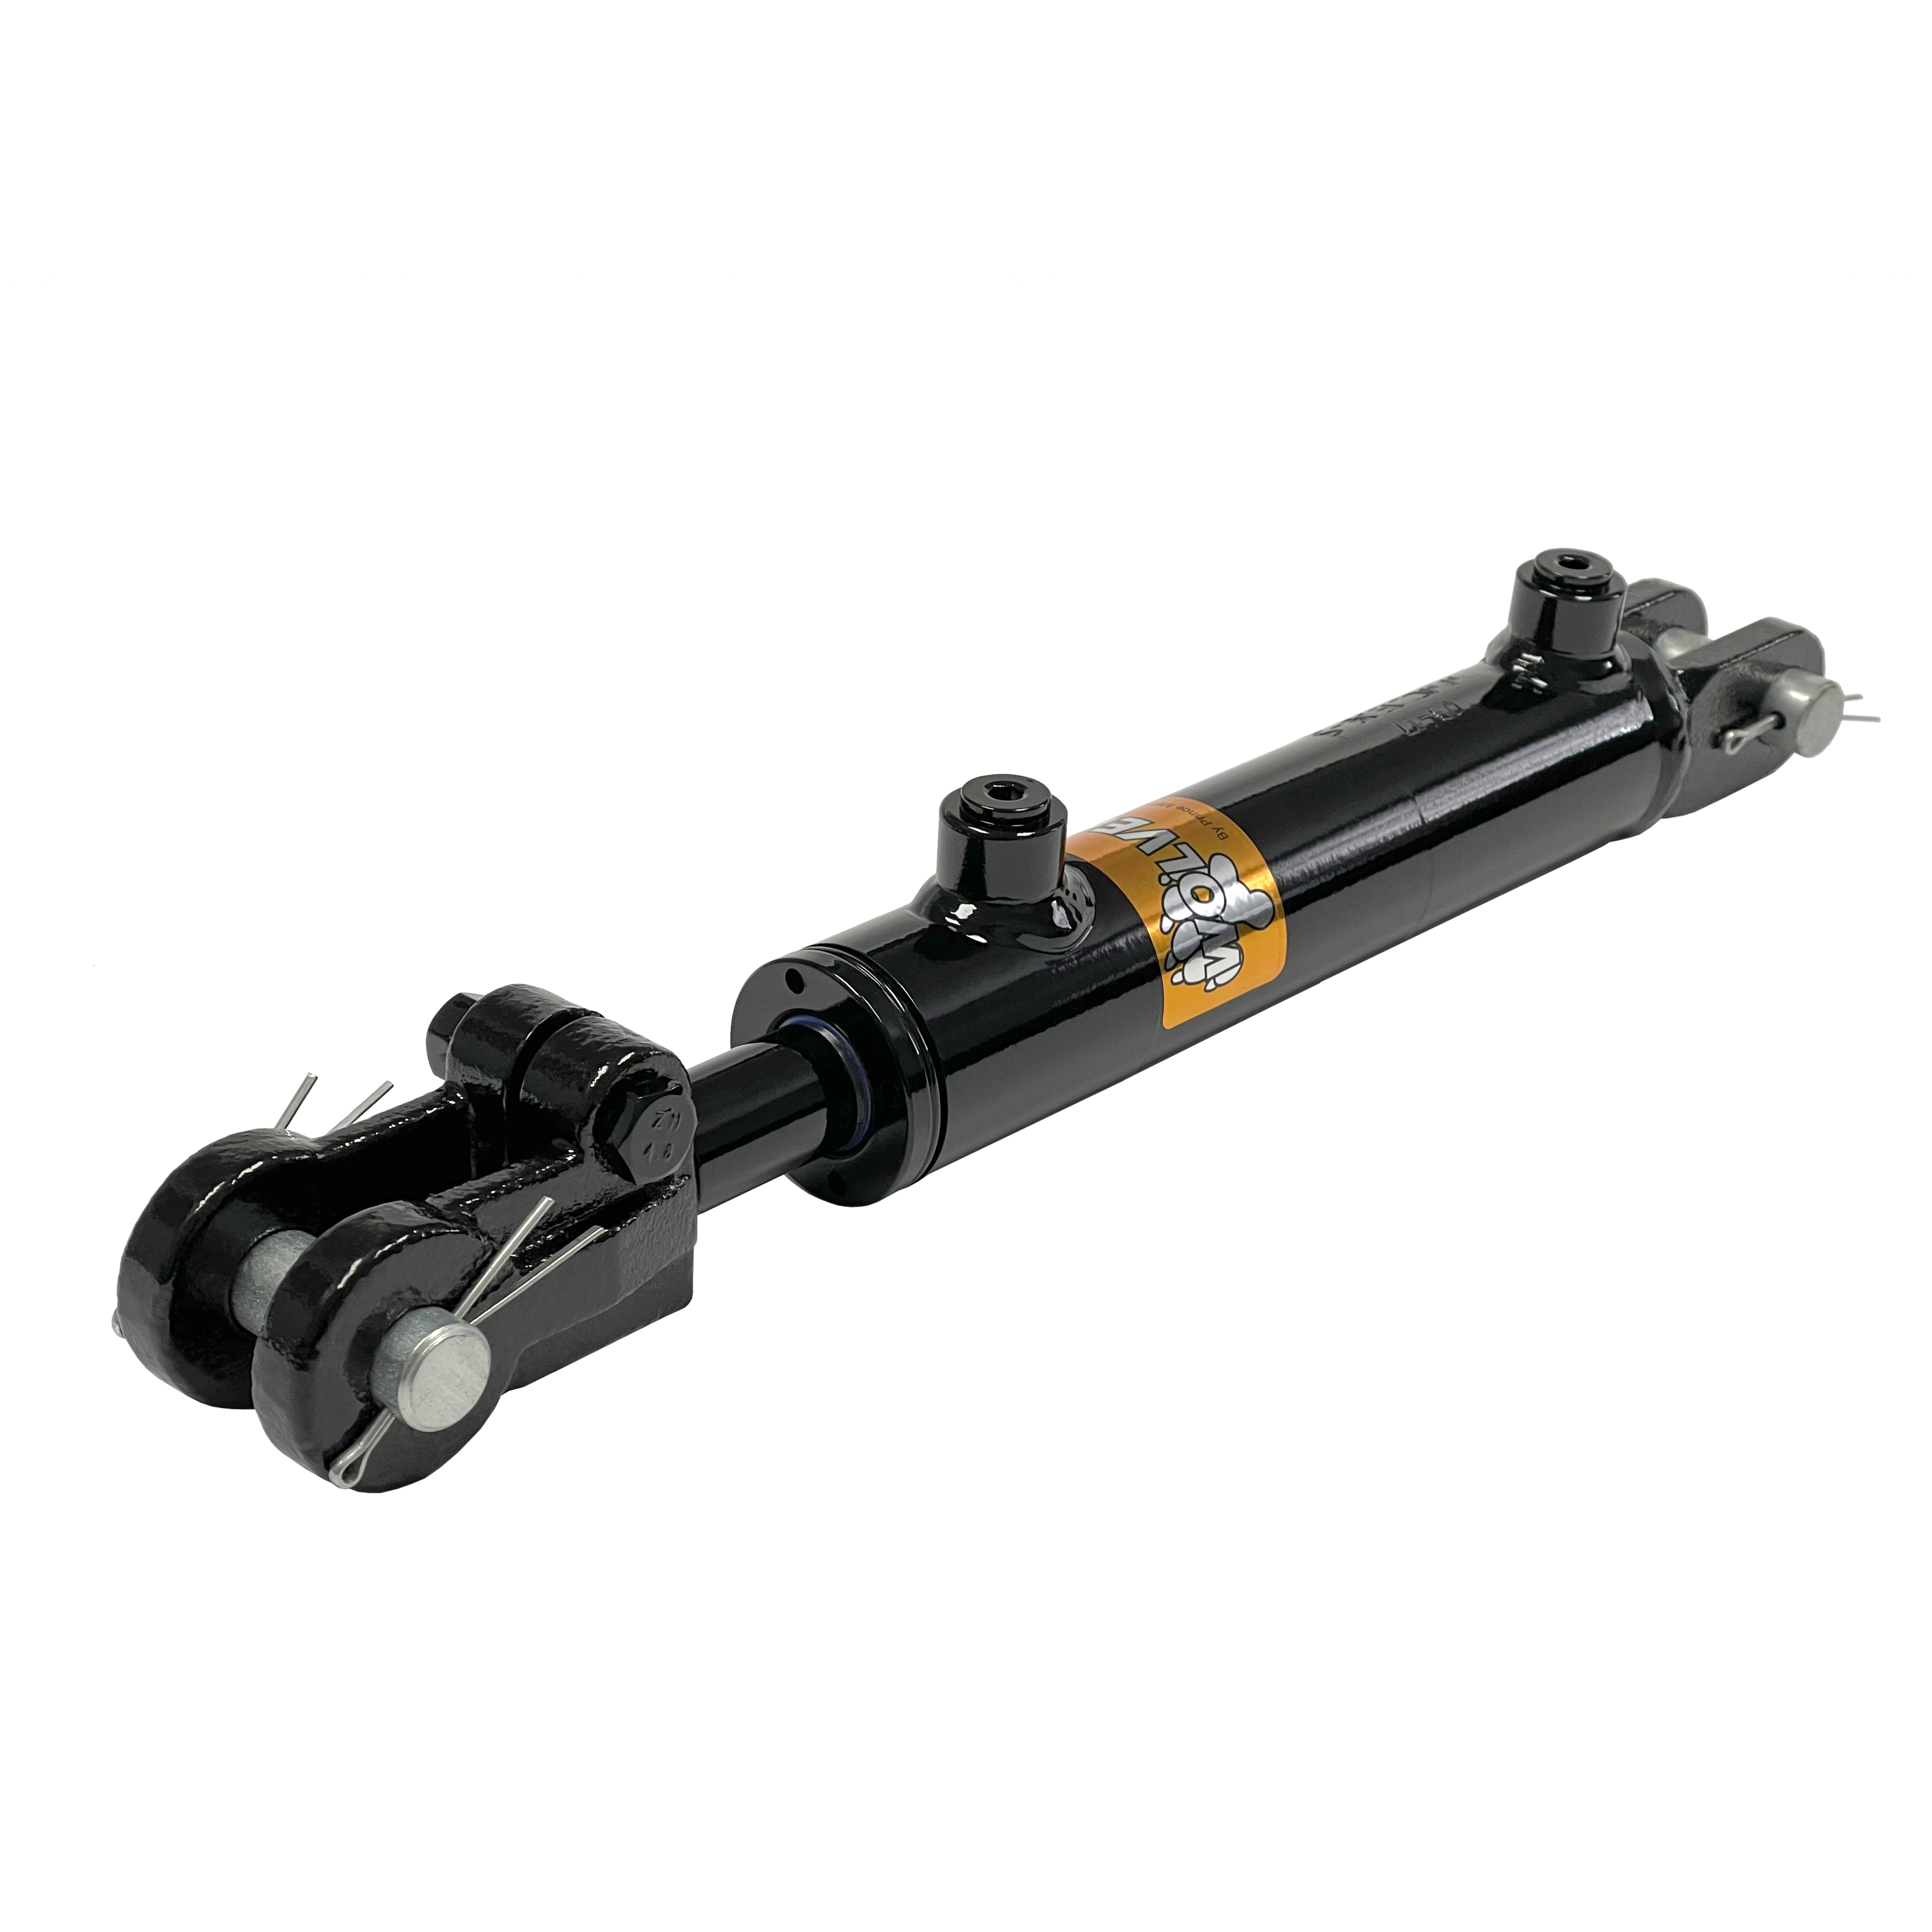 1.5 bore x 4 stroke Clevis hydraulic cylinder, welded Clevis double acting cylinder | Prince Hydraulics